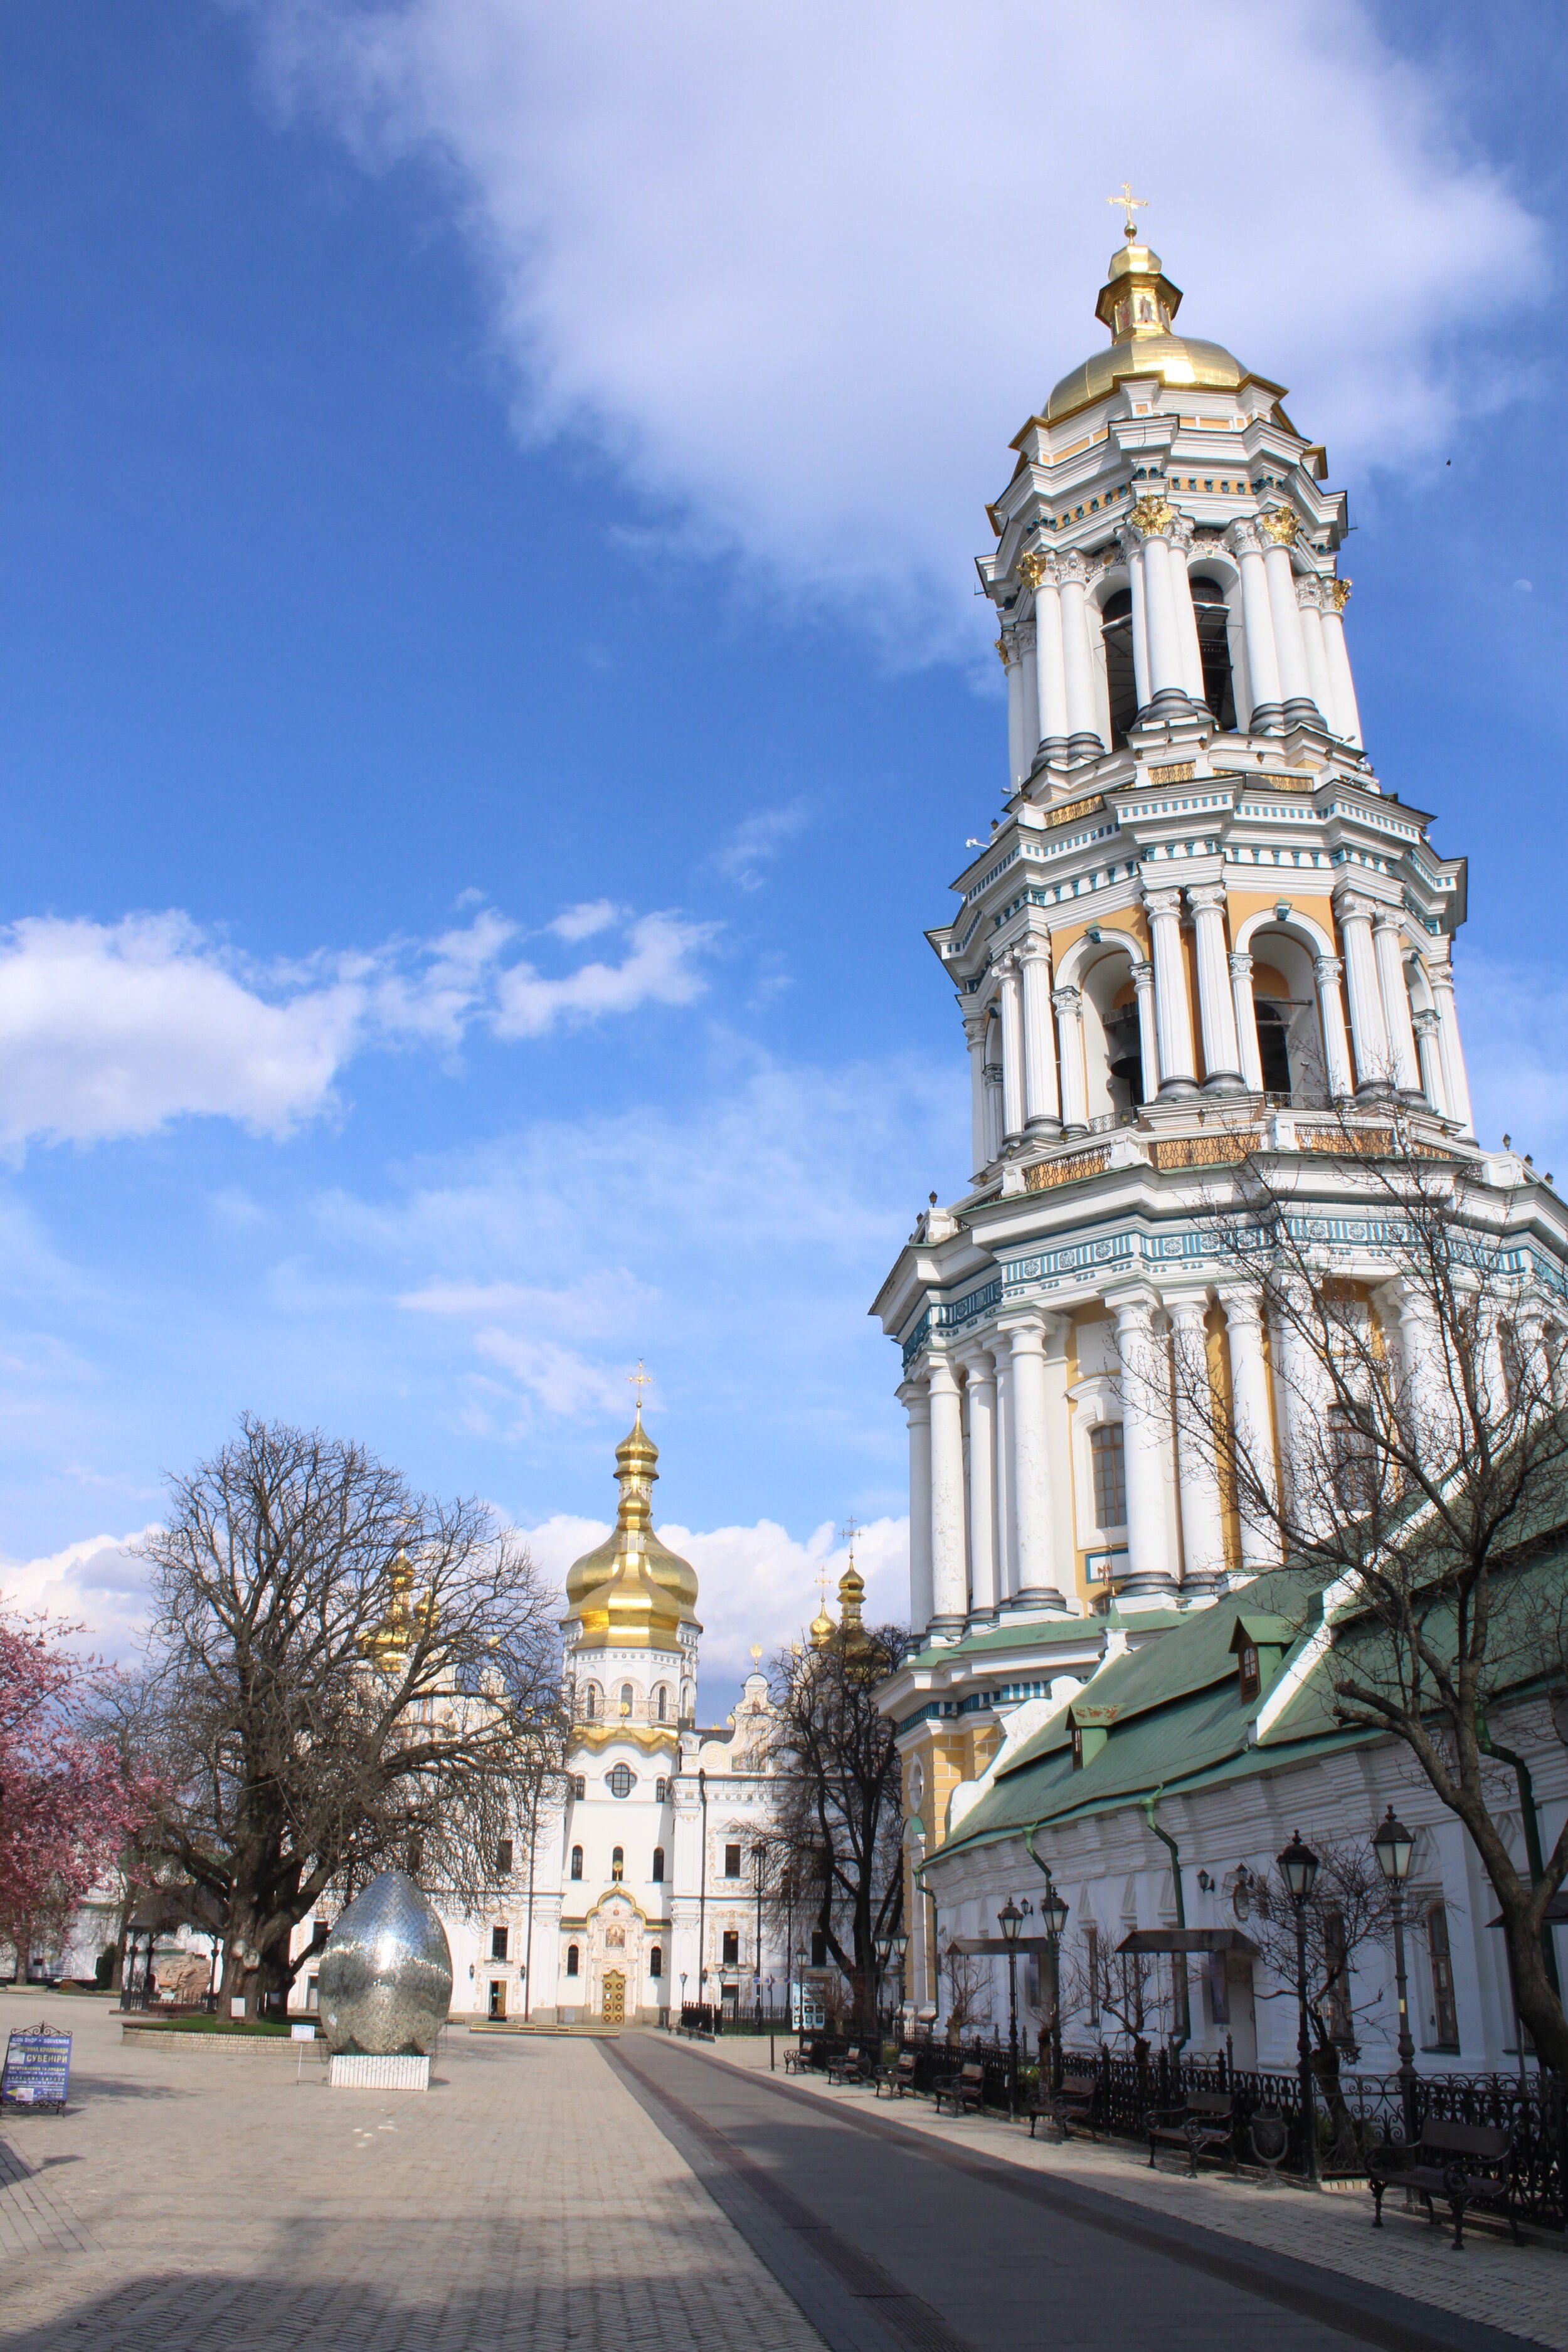   KYIV, Ukraine. April 21st. PICTURED:  The various religious monuments and buildings of Kyiv.  